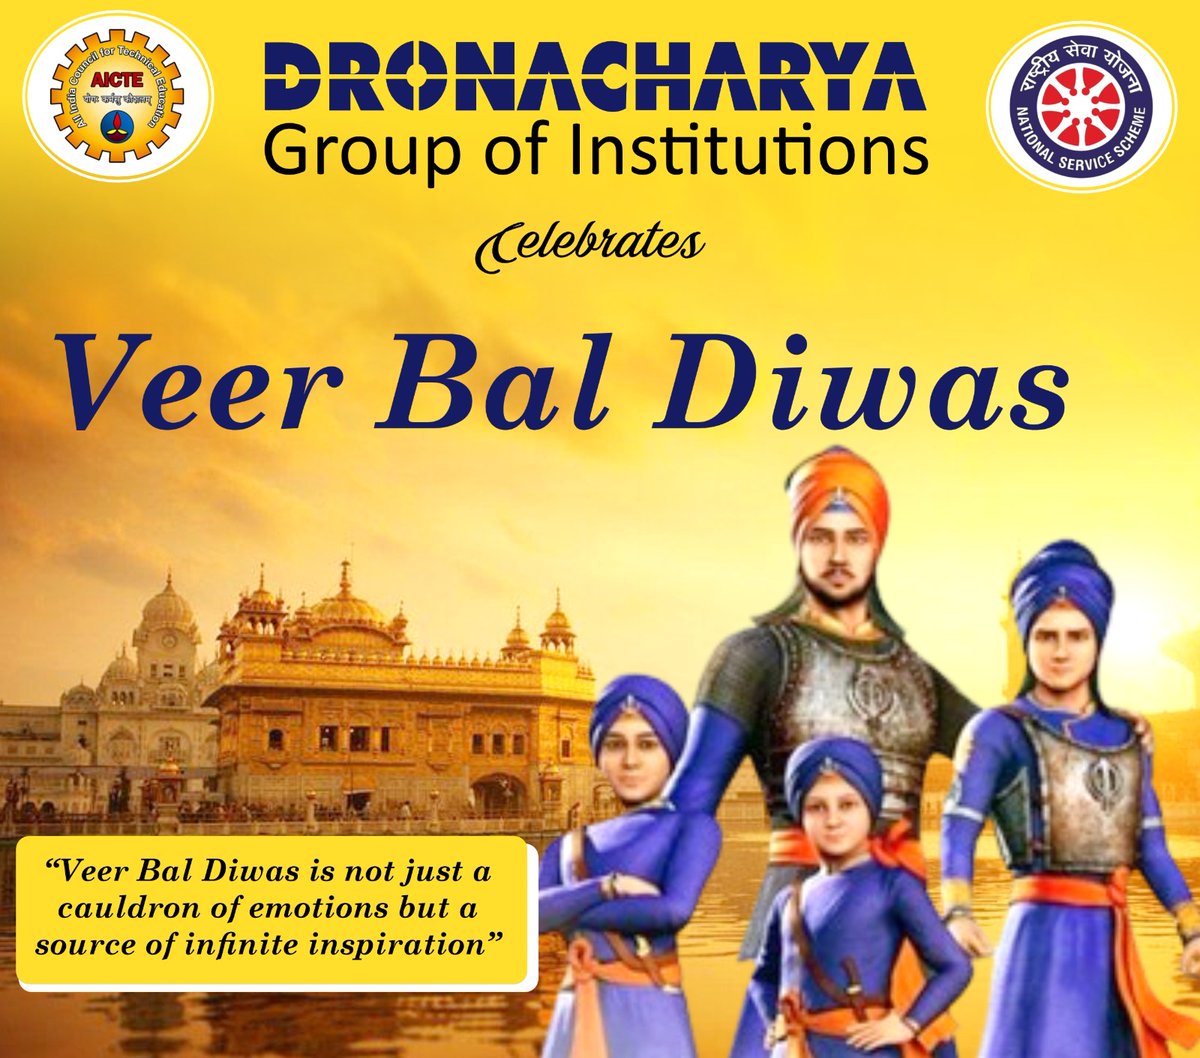 NSS Unit, Dronacharya Group of Institutions, Greater Noida celebrates “Veer Bal Diwas' to pay homage to the courage of the “Sahibzades”, four sons of Guru Gobind Singh, the last Sikh guru.
#celebration
#veerbaaldiwas
#tribute
#courage
#history
#nationalservicescheme
#sikhism